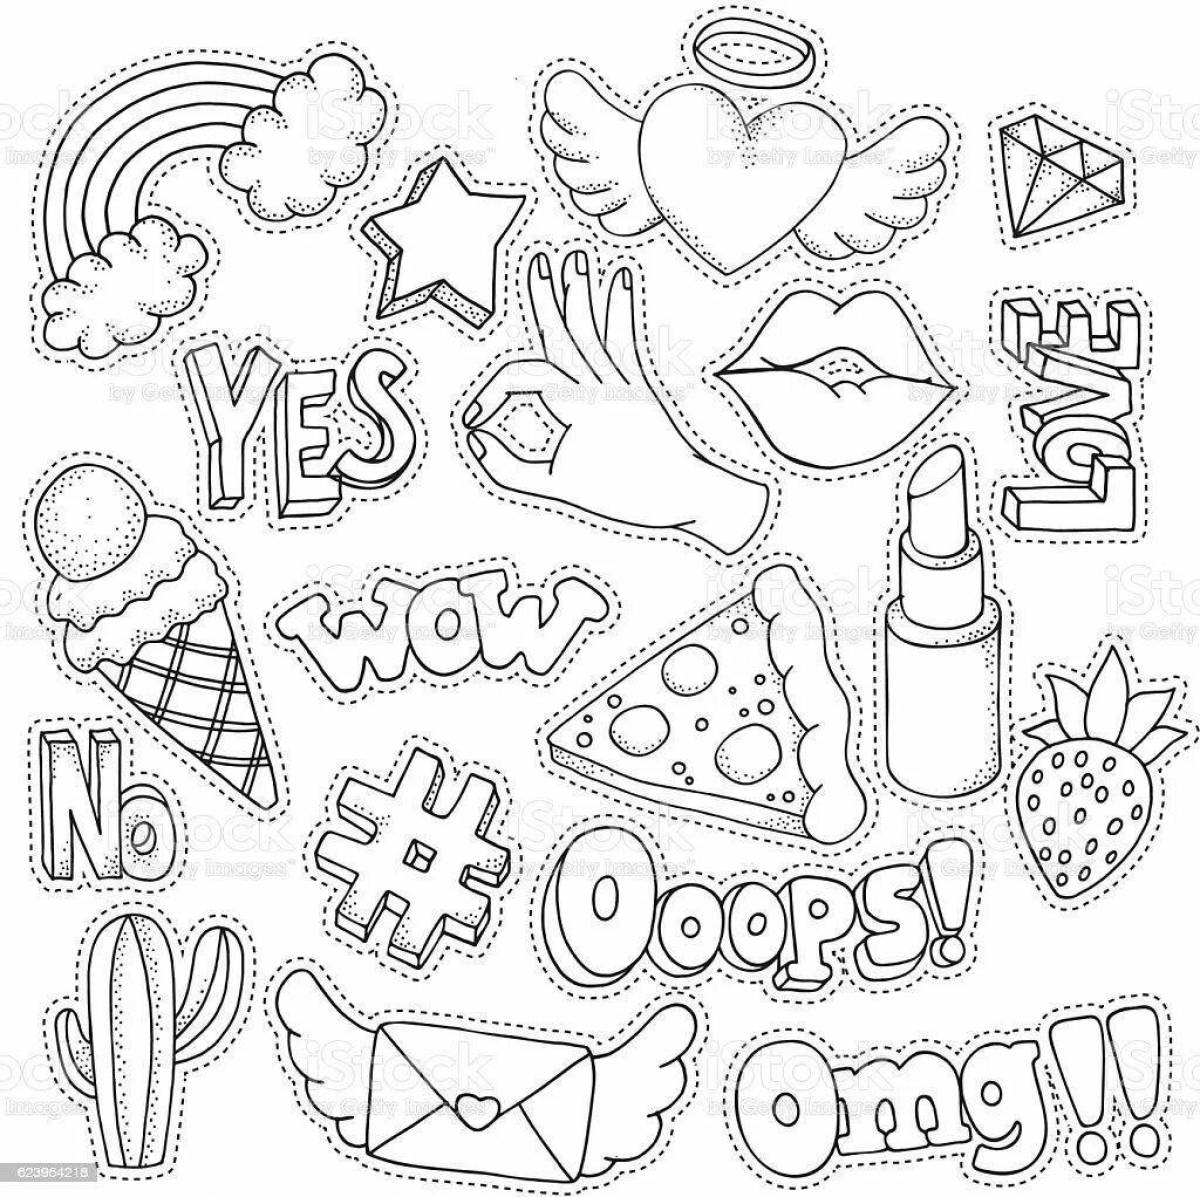 Violent stickers for coloring pages